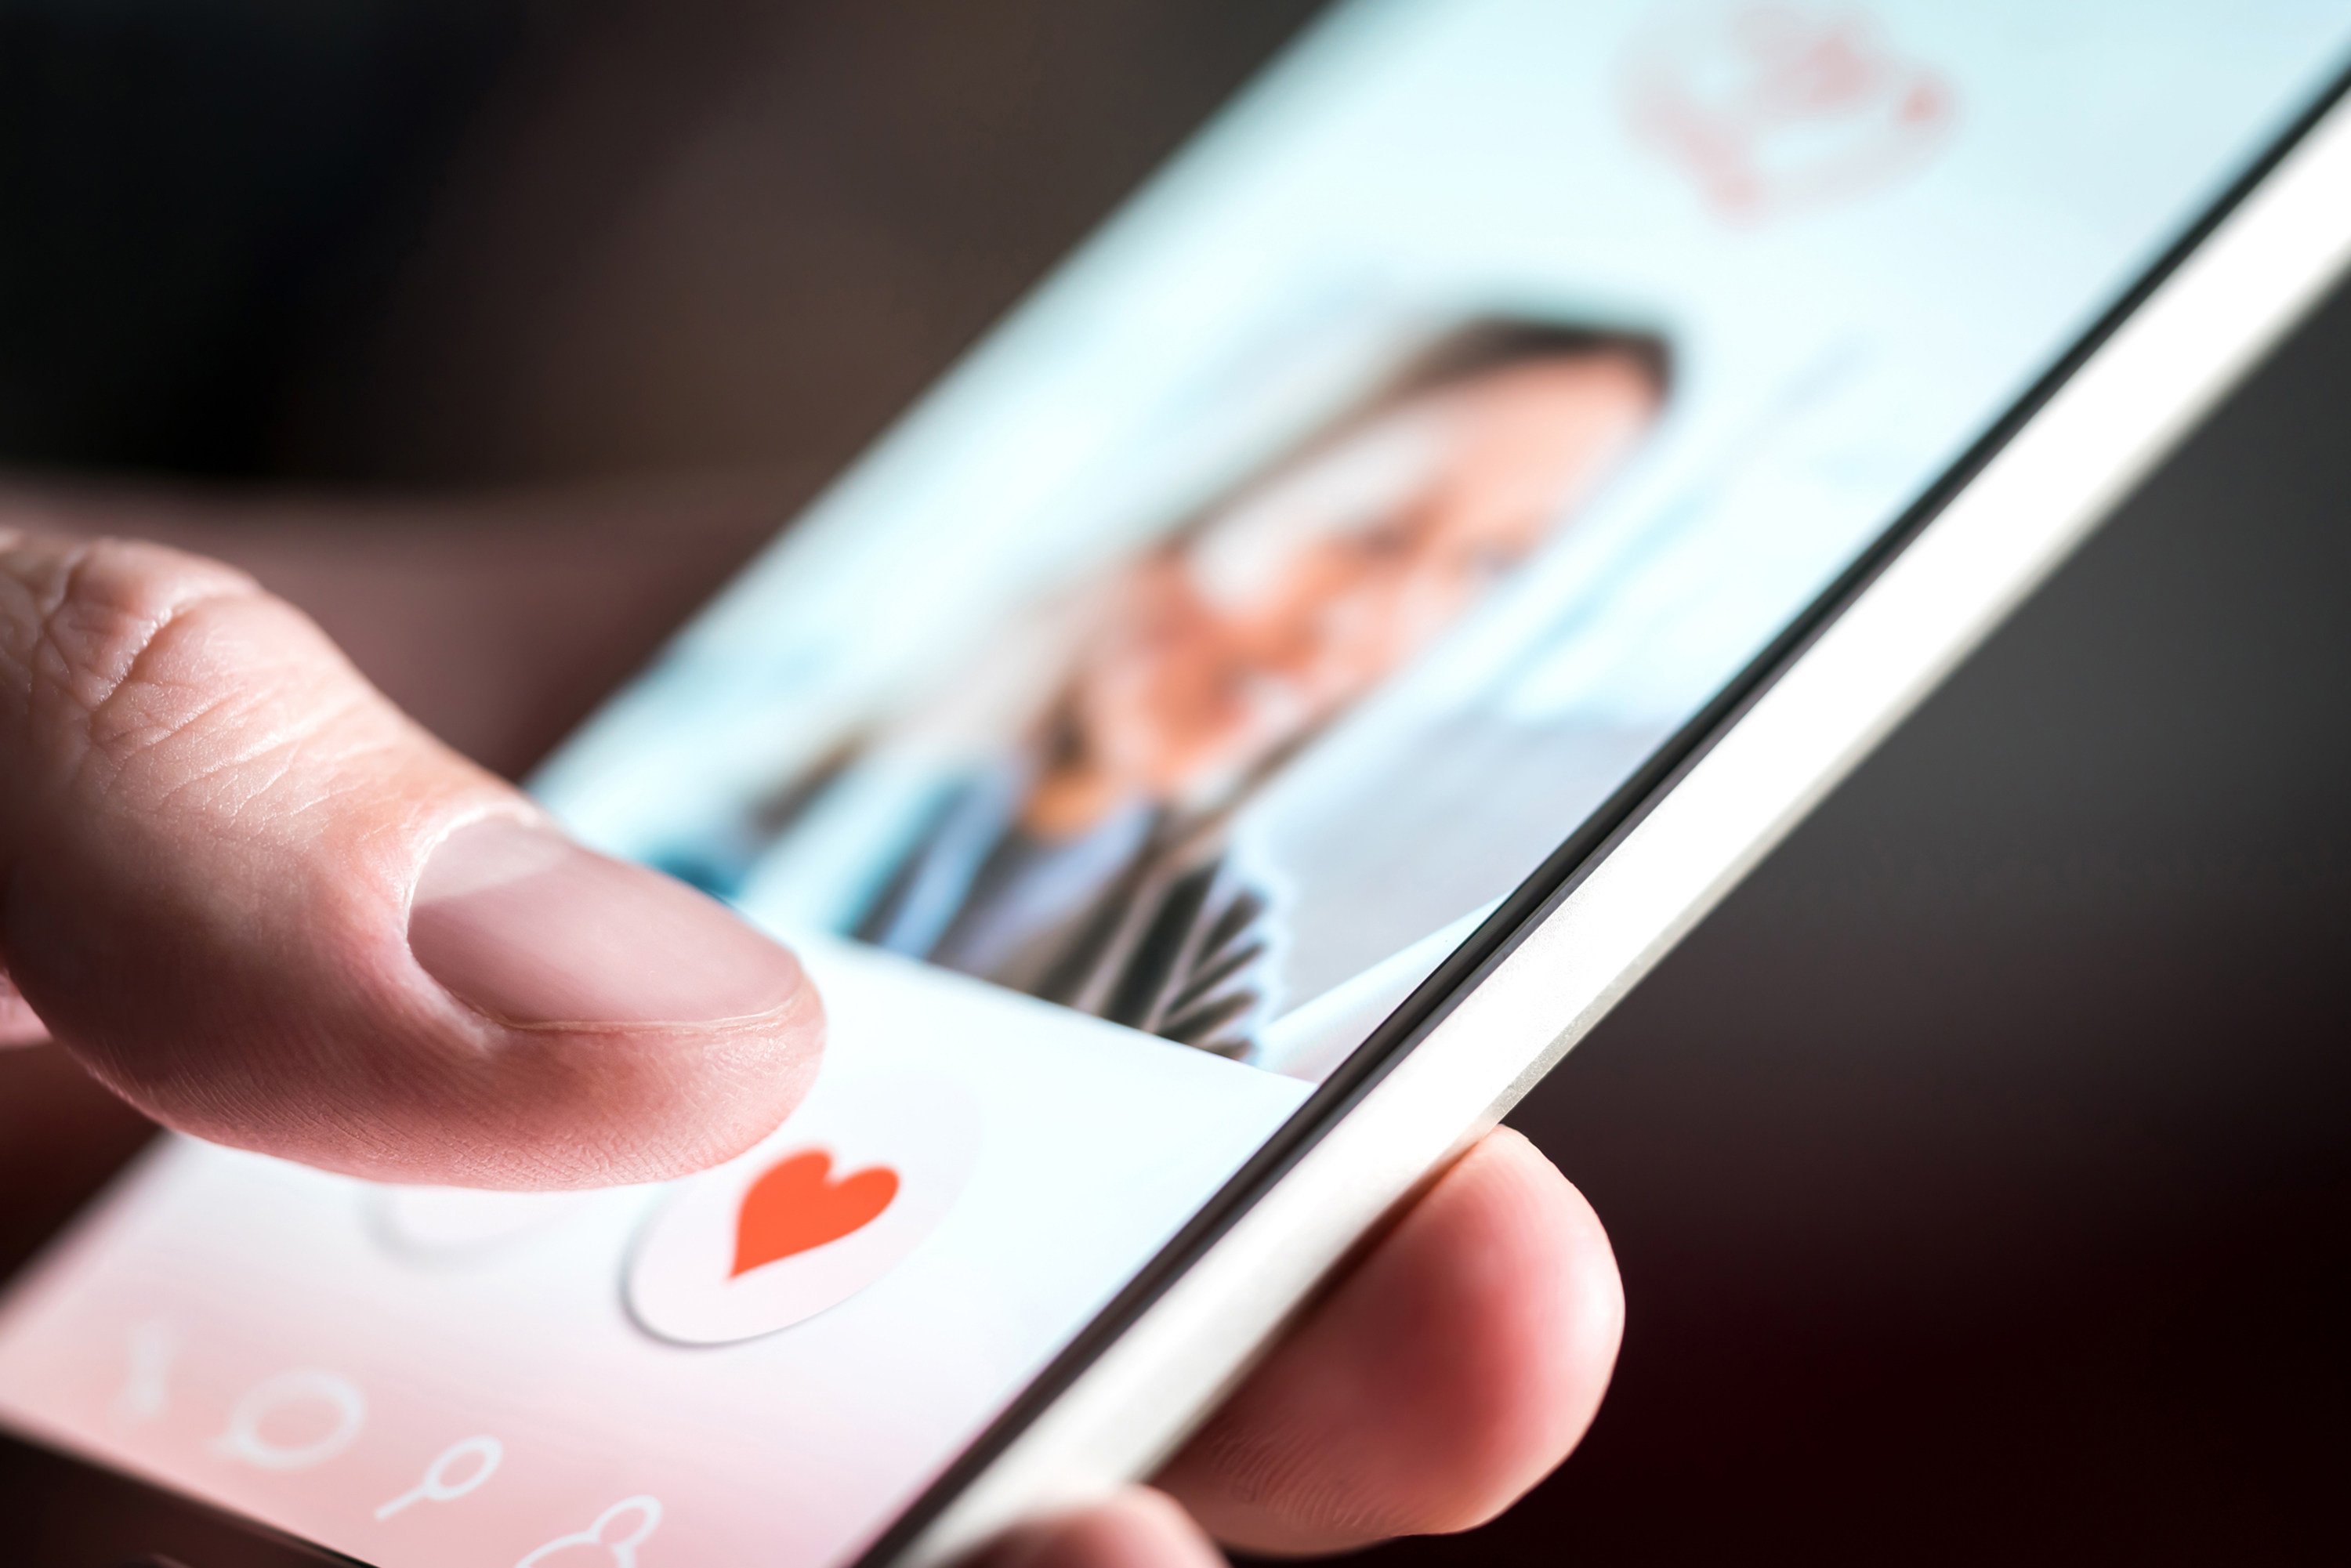 More people in Singapore are shunning dating apps, and instead are signing up to events for singles who want to mingle with potential partners in person. Photo: TNS